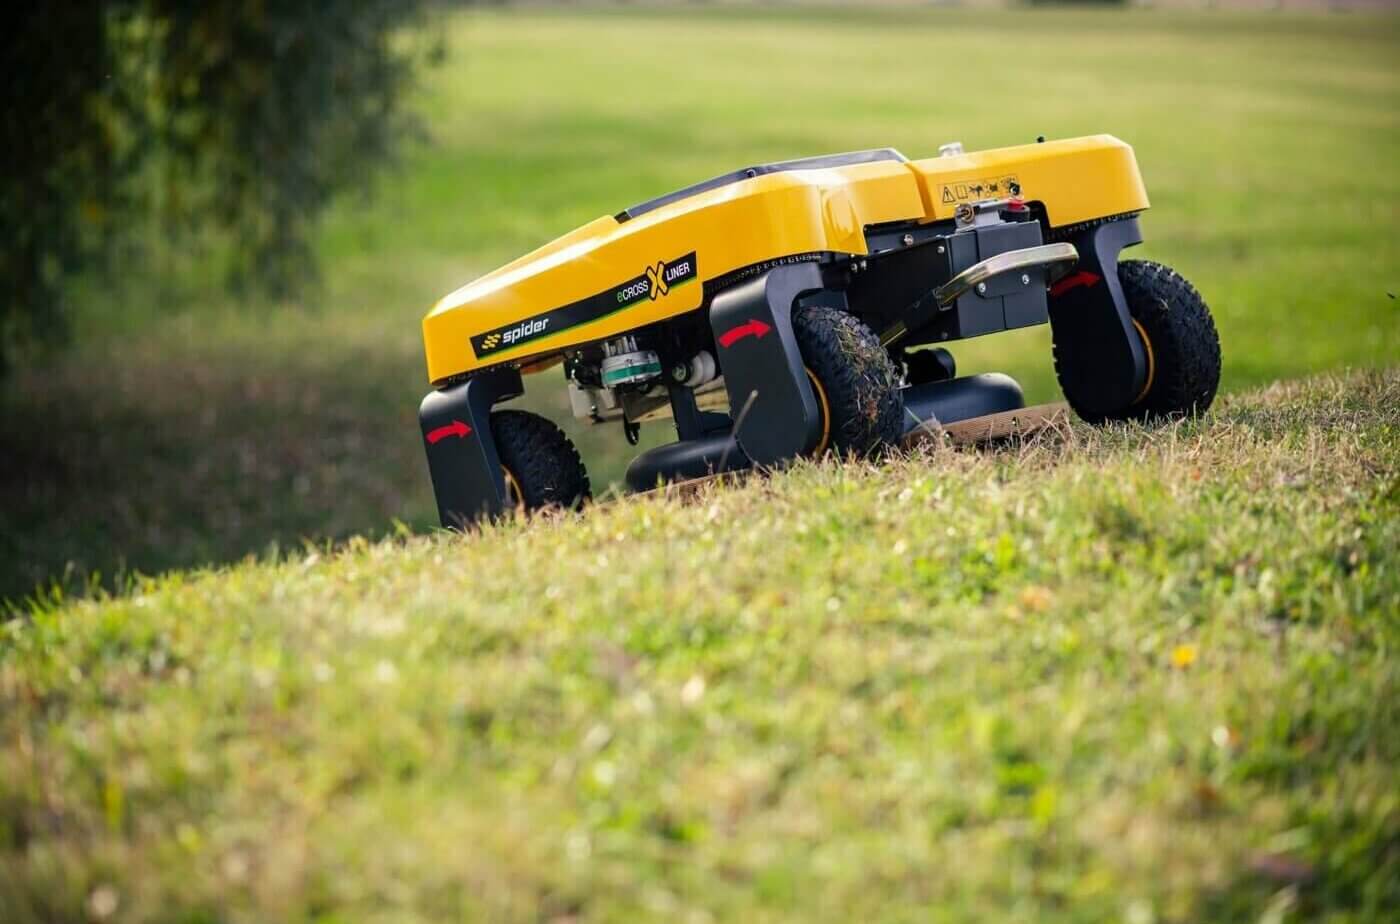 A yellow and black SPIDER eCROSSLINER mower on a grassy slope, showcasing its compact design and terrain versatility.